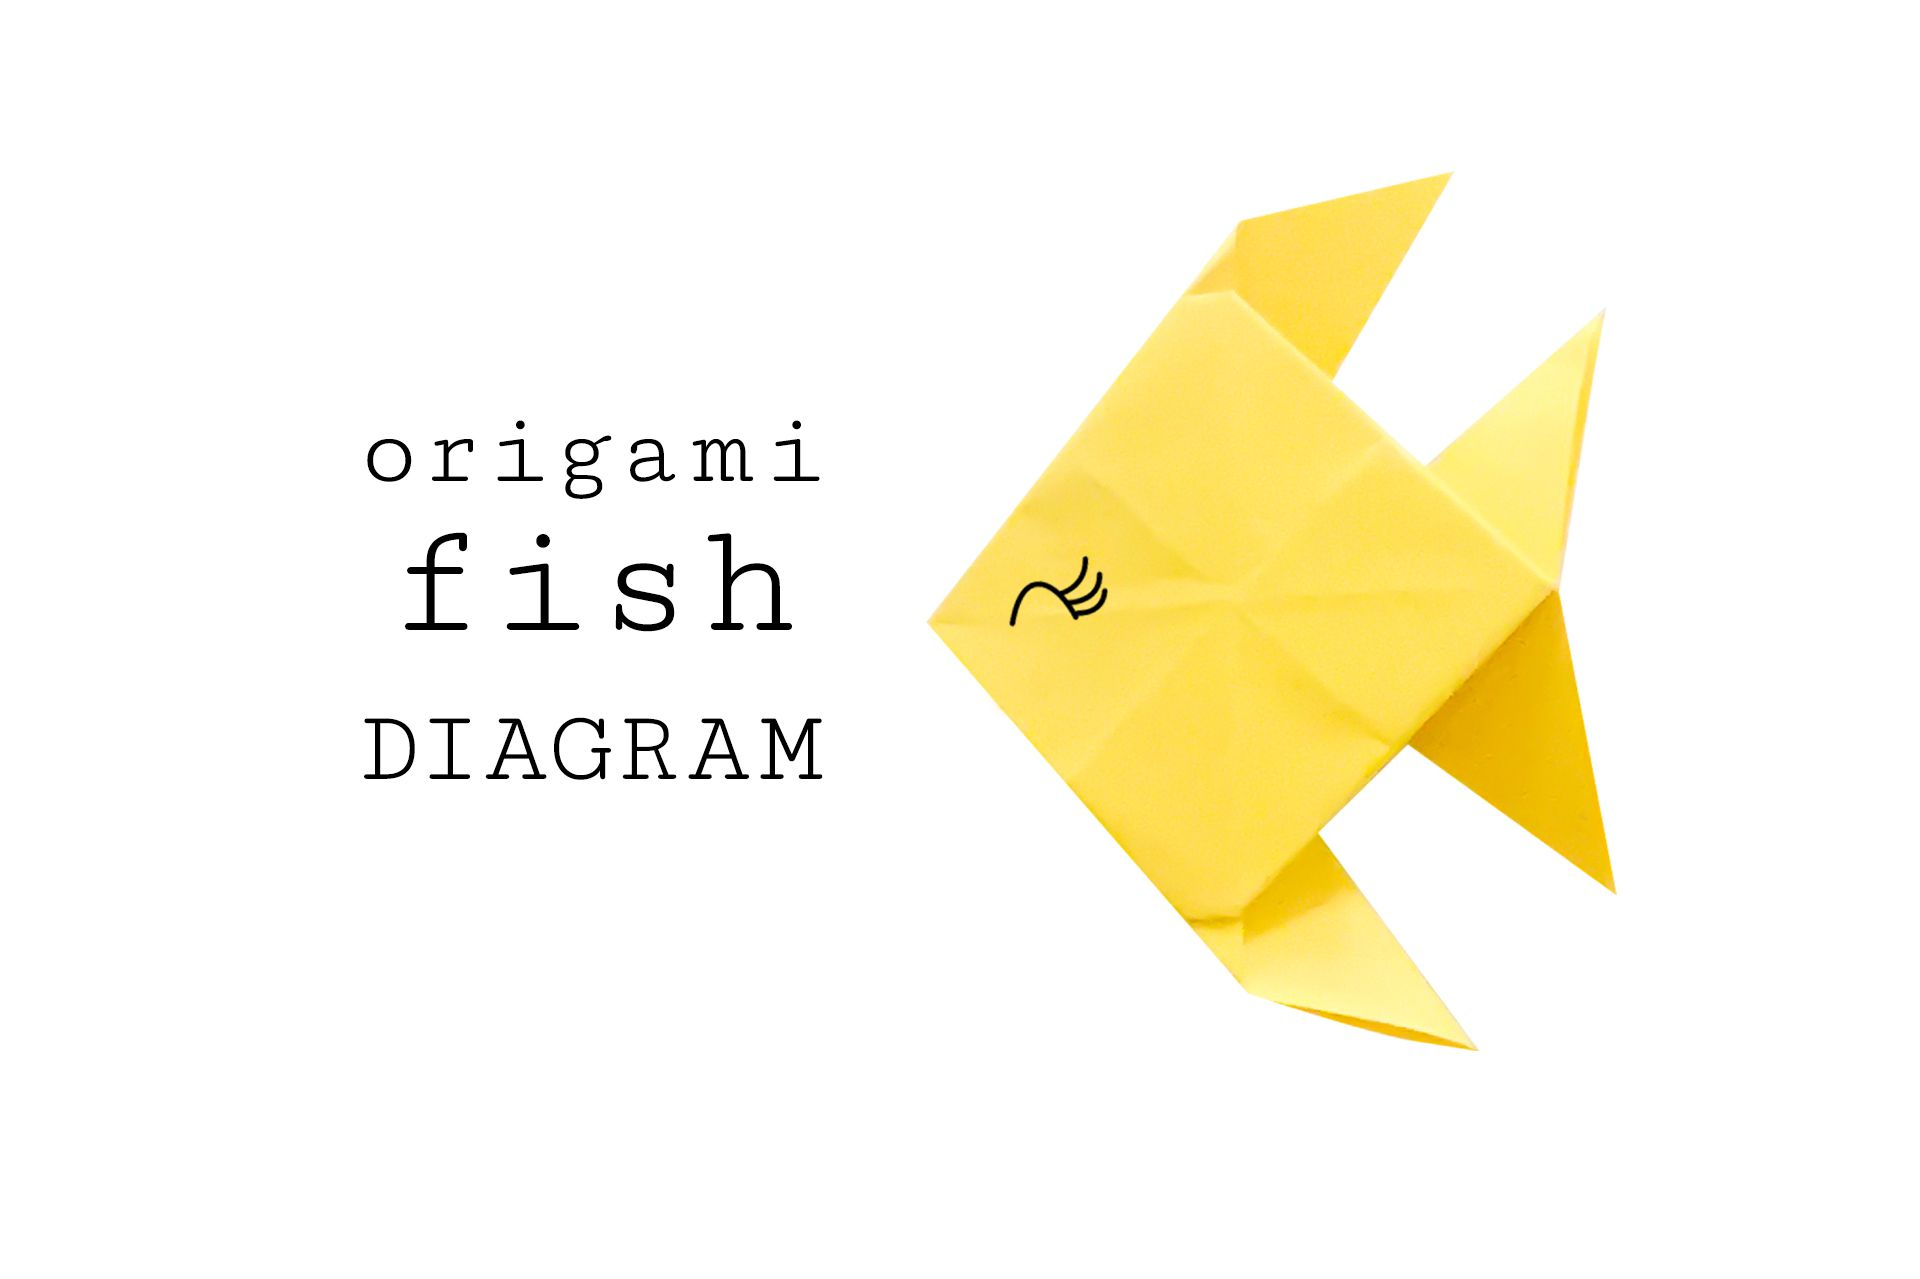 Origami Fish Video Step Step Instructions For Making An Origami Fish